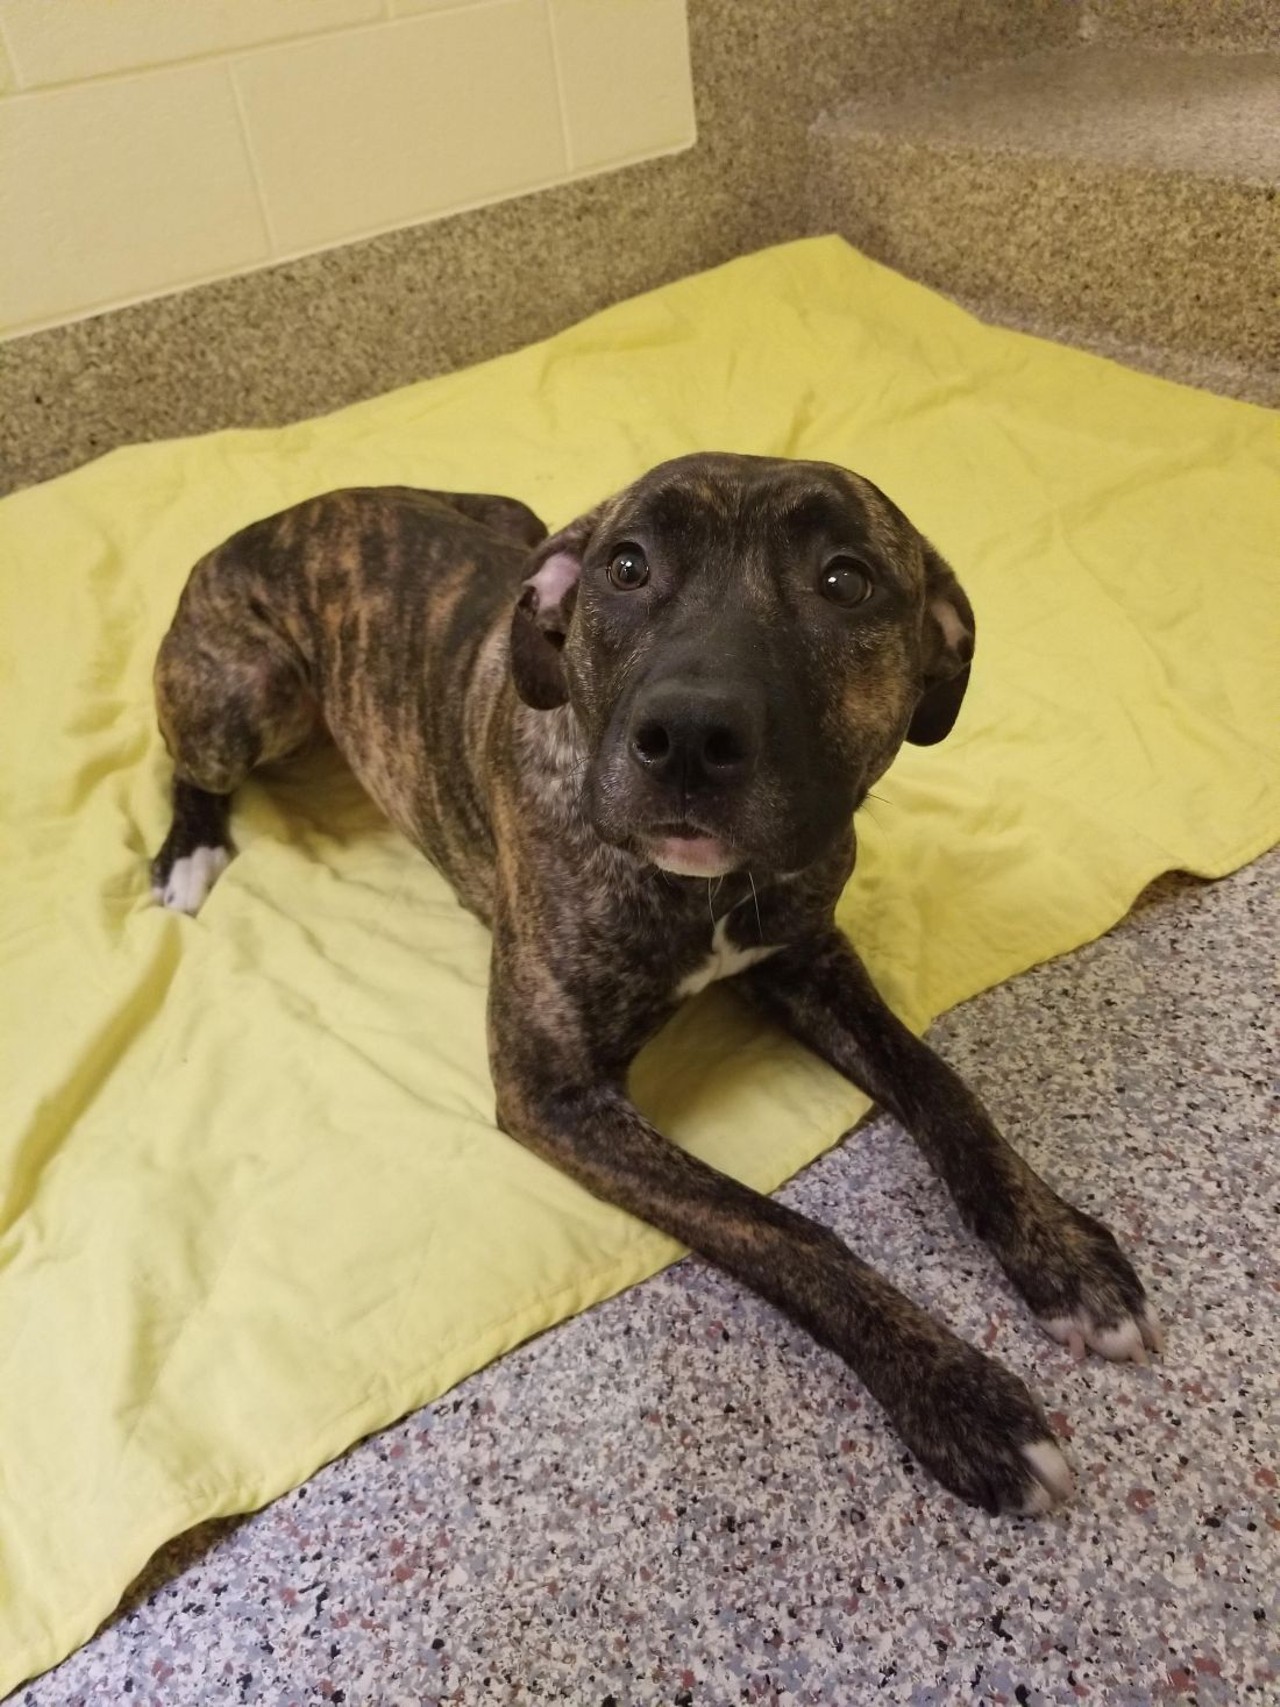 NAME: Duchess
GENDER: Female
BREED: Pit Bull Terrier
AGE: 1 year, 1 month
WEIGHT: 54 pounds
SPECIAL CONSIDERATIONS: None
REASON I CAME TO MHS: Owner surrender
LOCATION: Berman Center for Animal Care in Westland
ID NUMBER: 861039